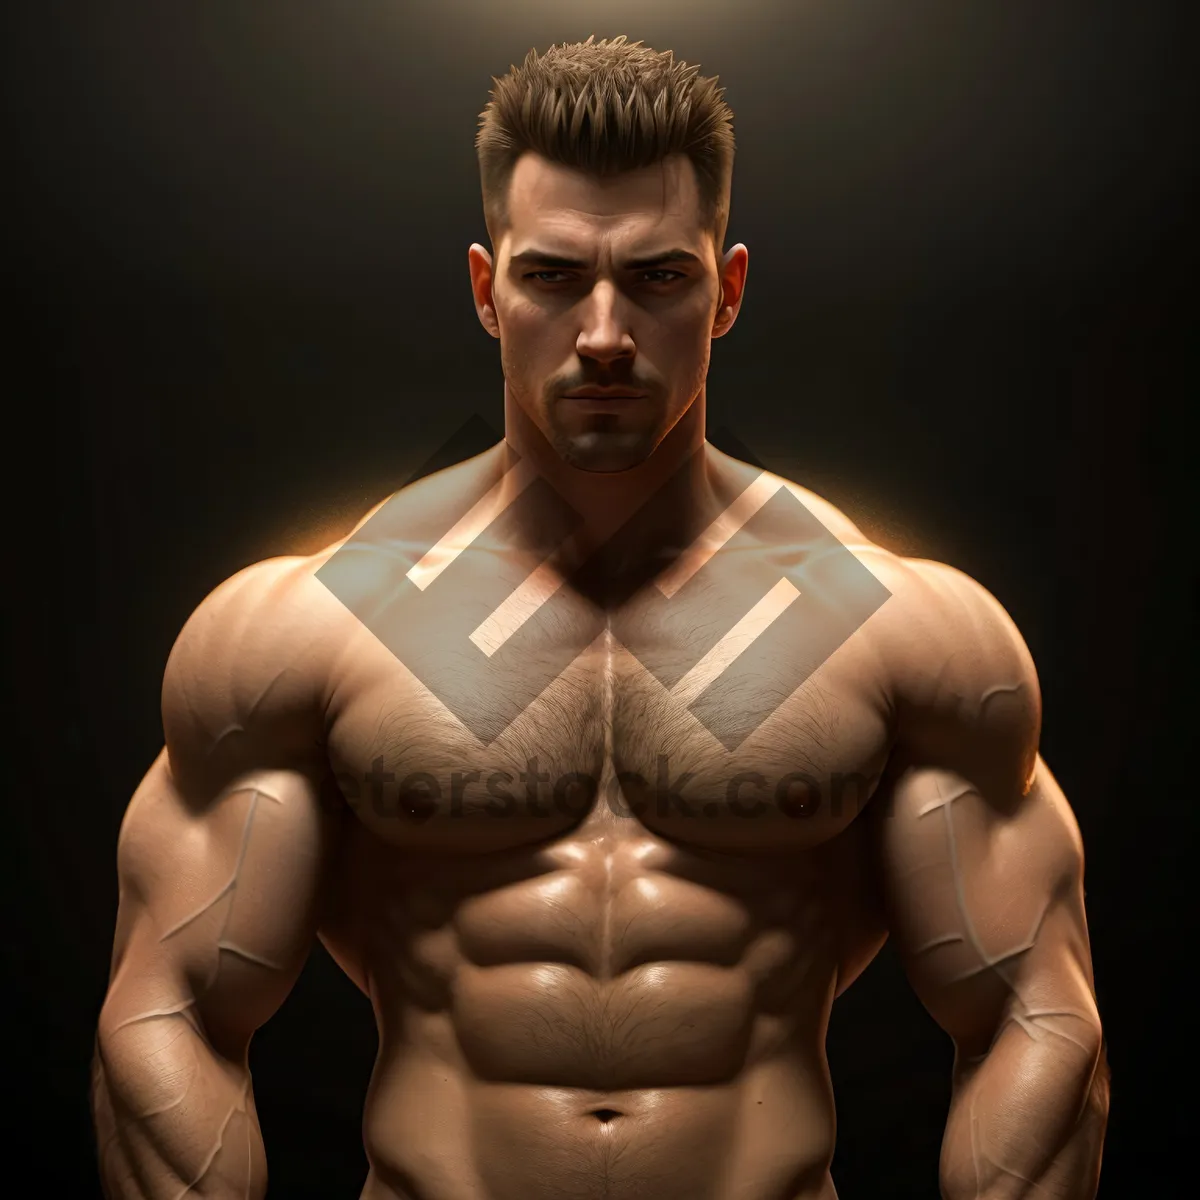 Picture of Powerful and Muscular Bodybuilder Posing Shirtless